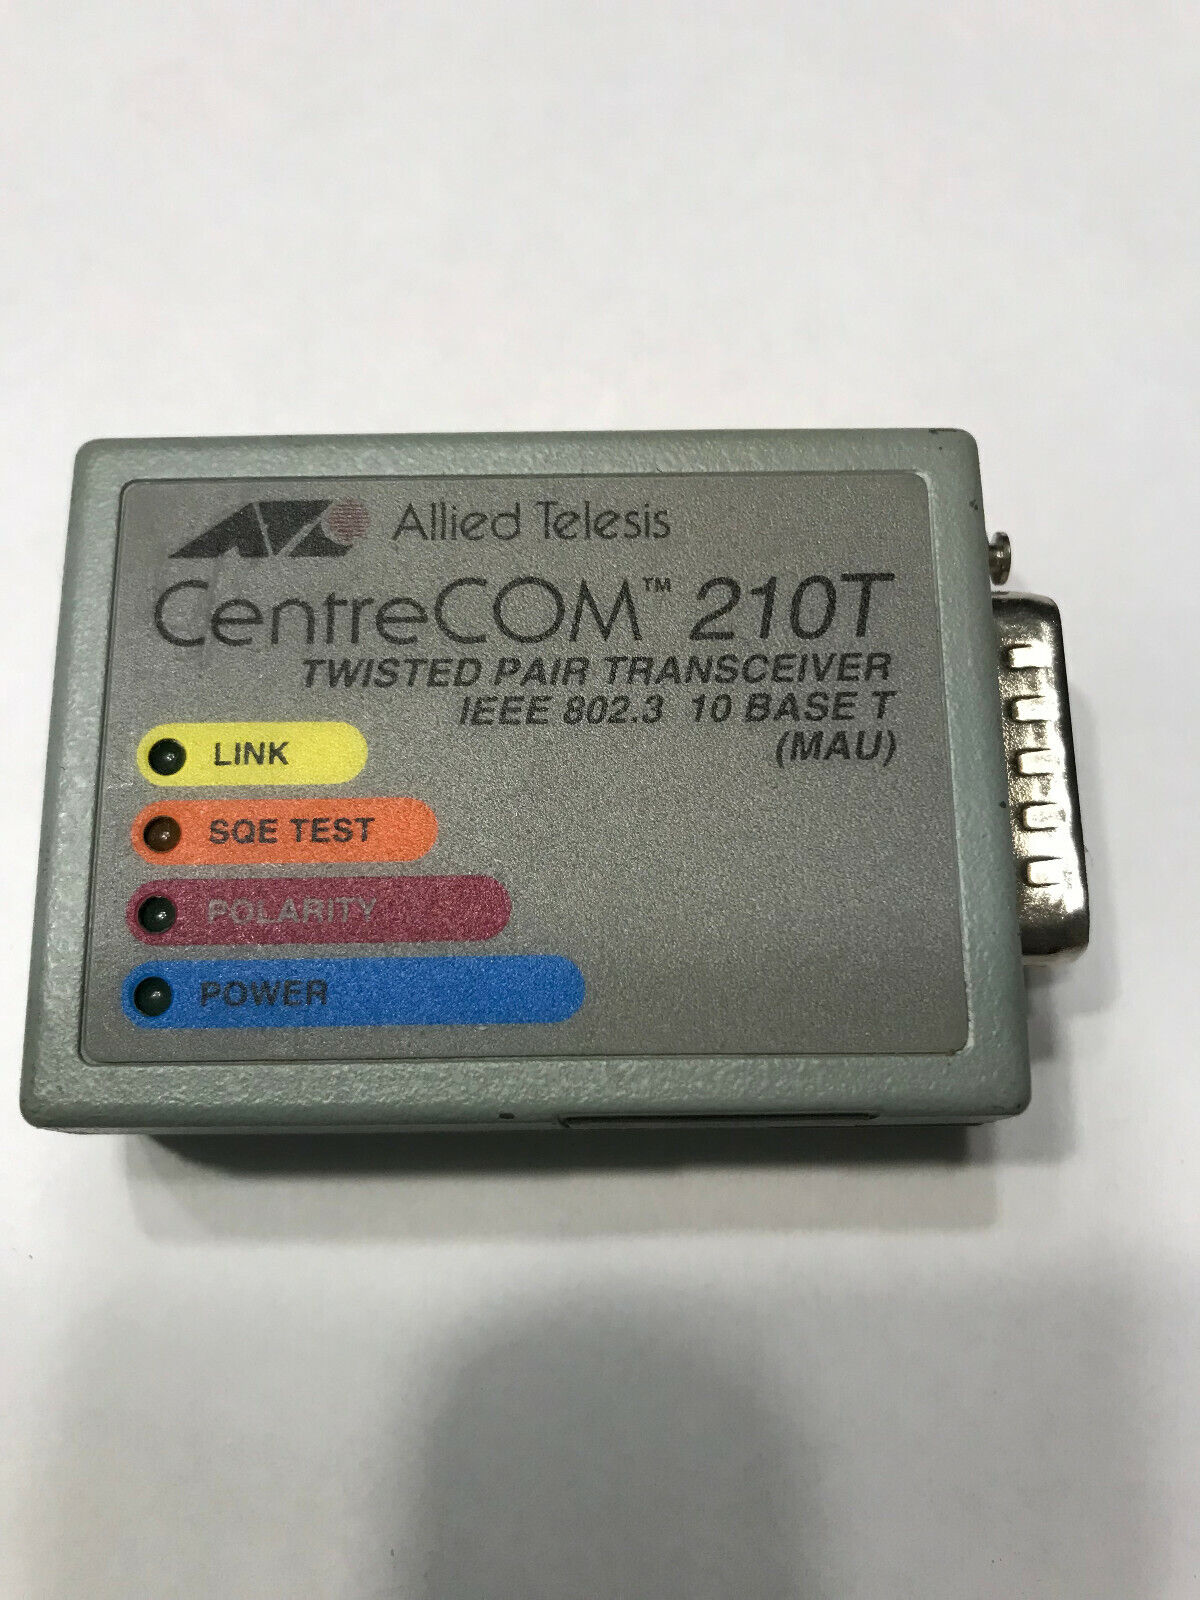 CentreCom 210T Twisted Pair Transceiver IEEE 802.3 10 Base T (MAU)